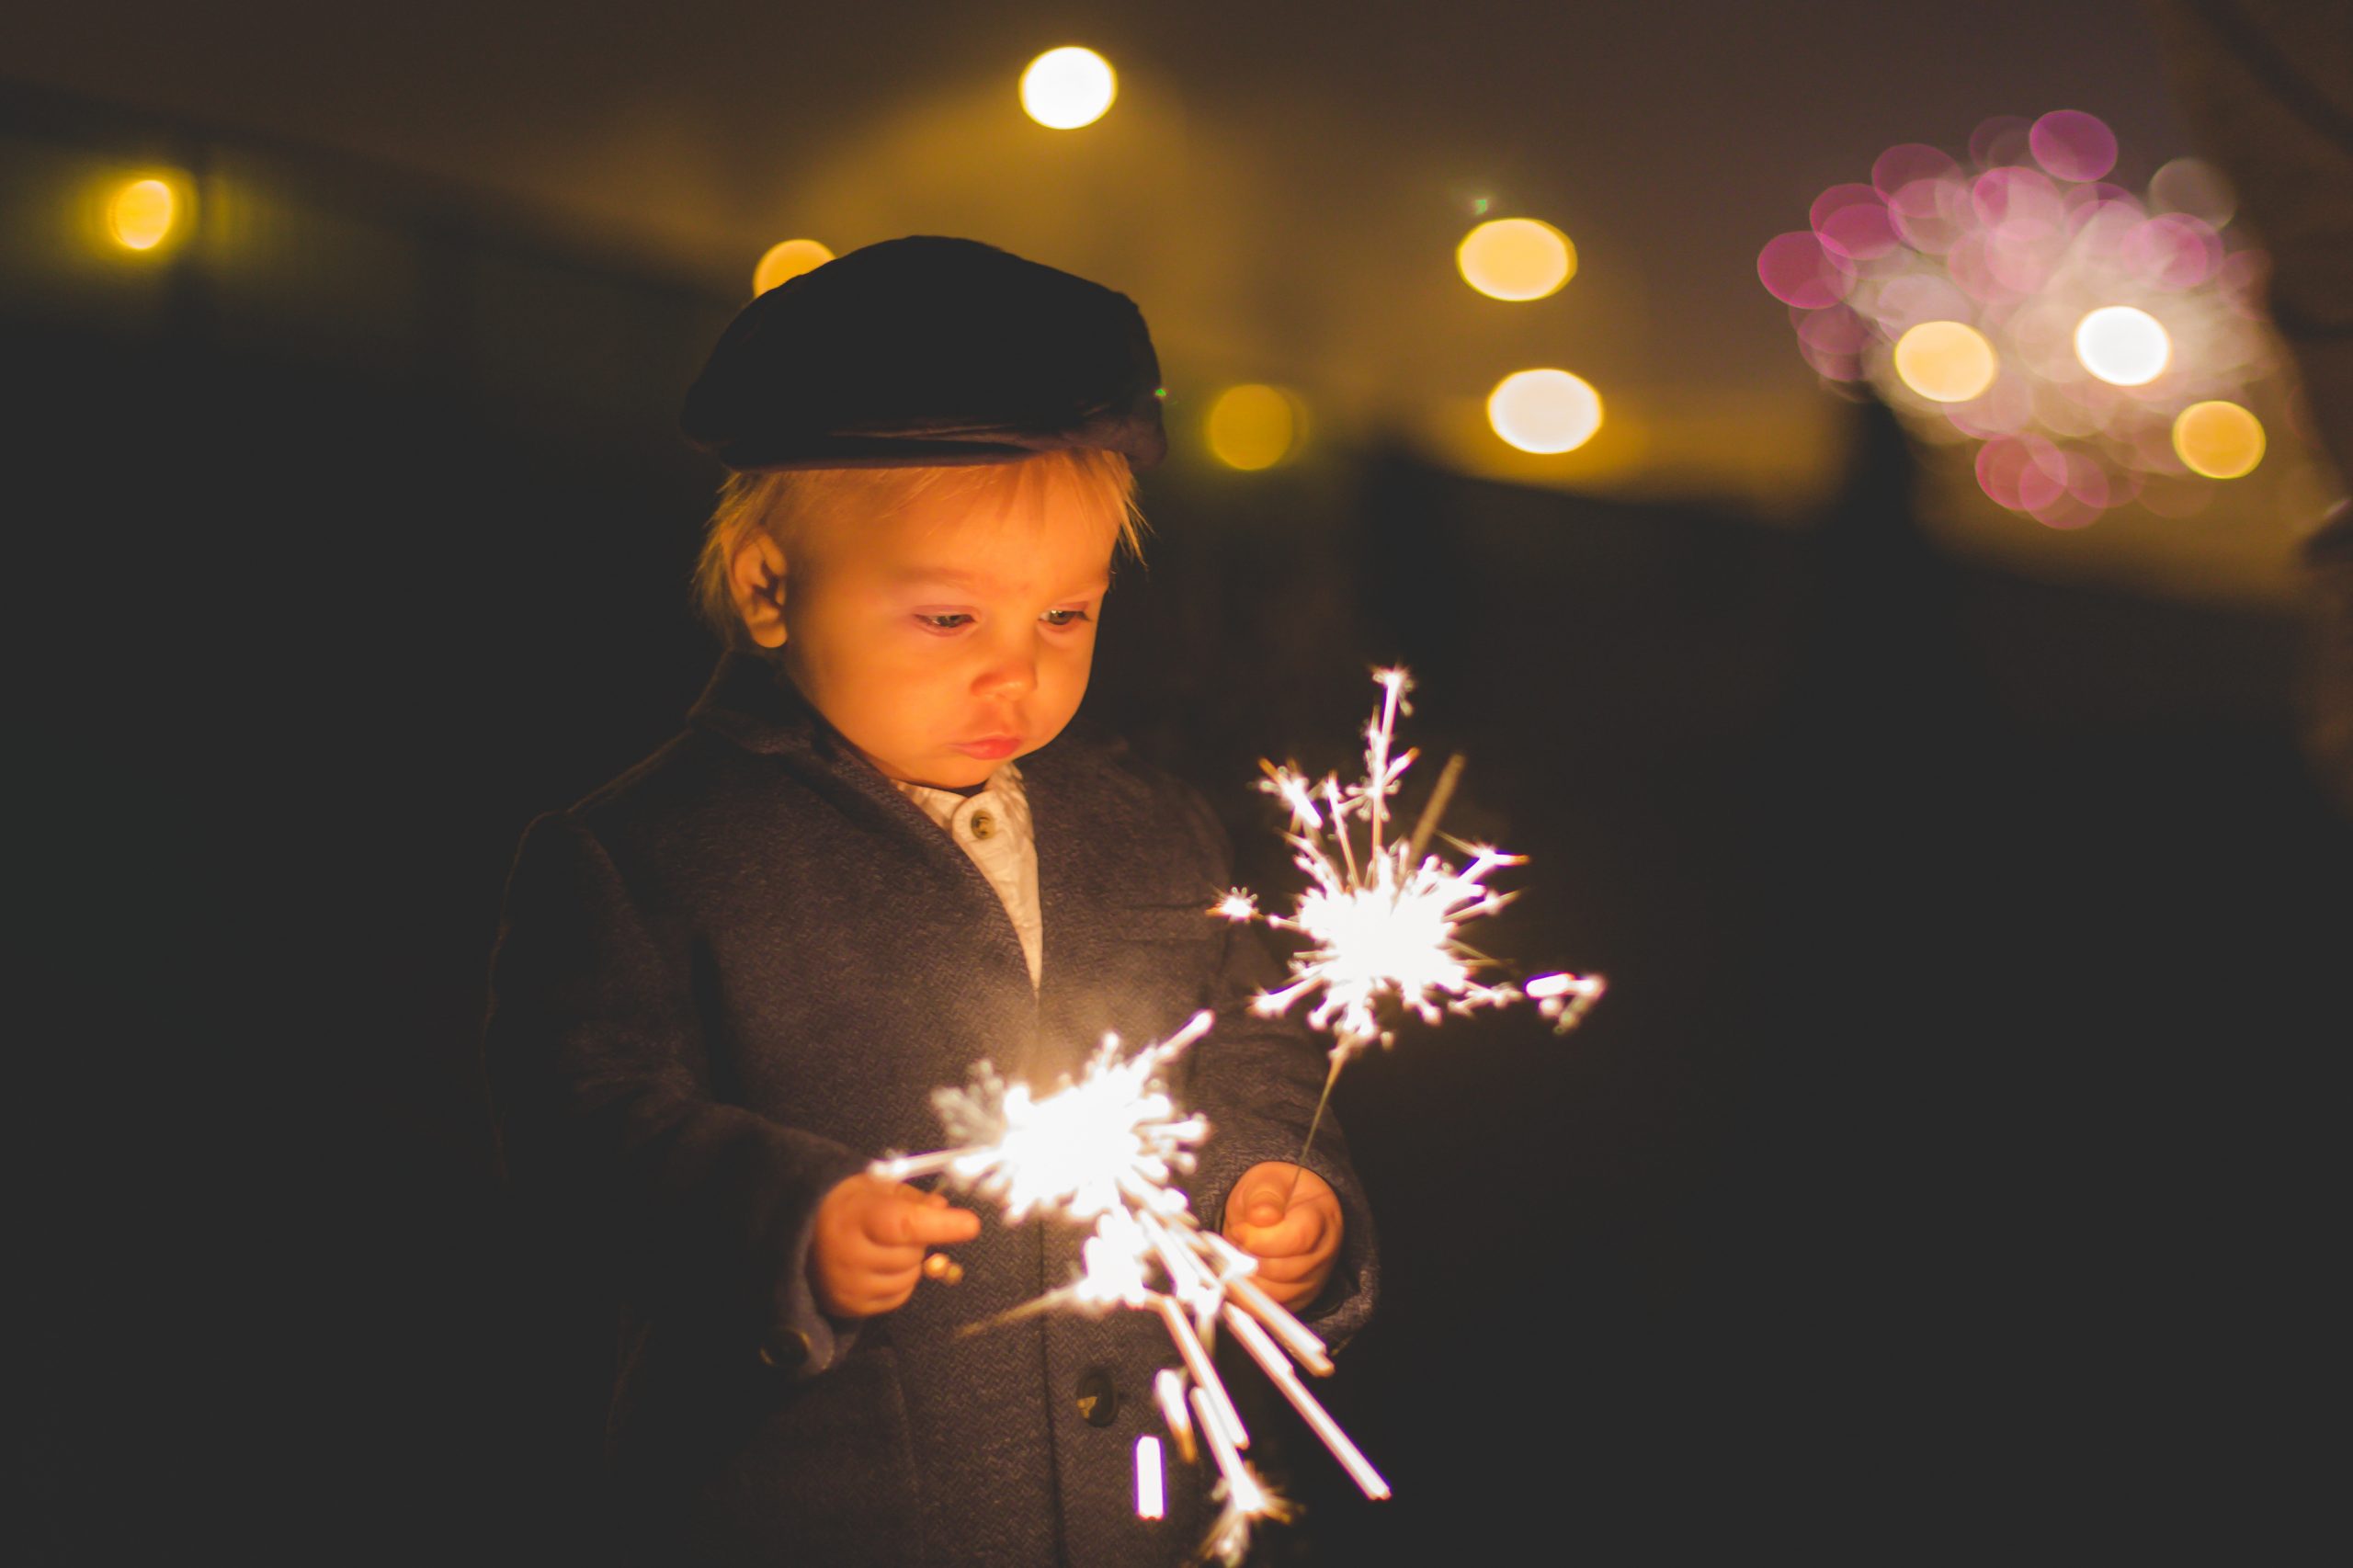 New Years eve ideas for families of toddlers and young kids